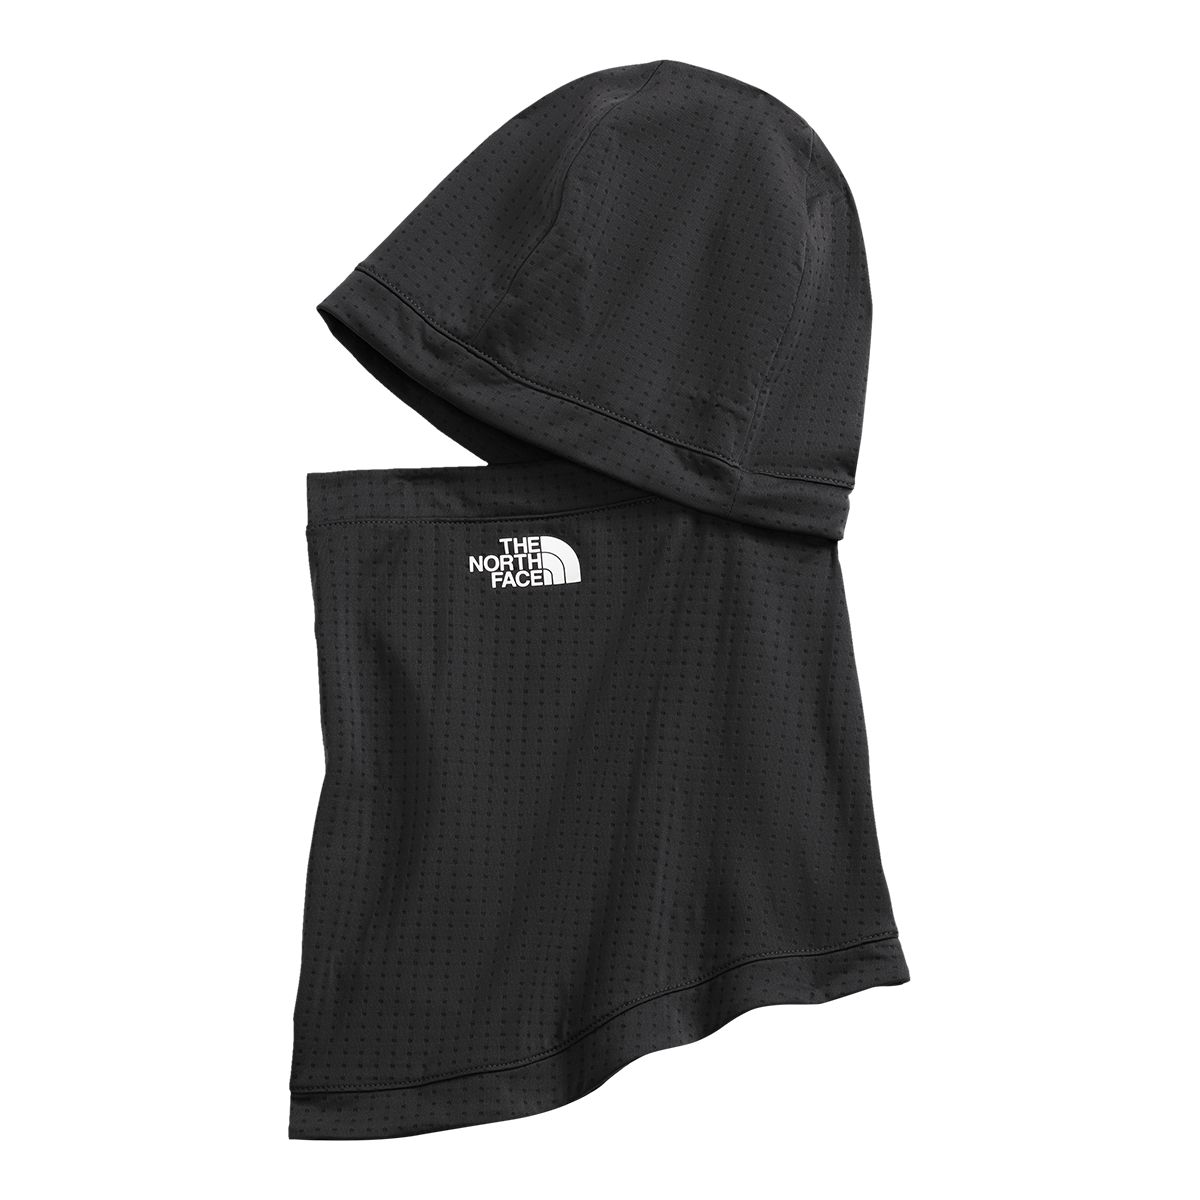 Image of The North Face Men's DotKnit Balaclava